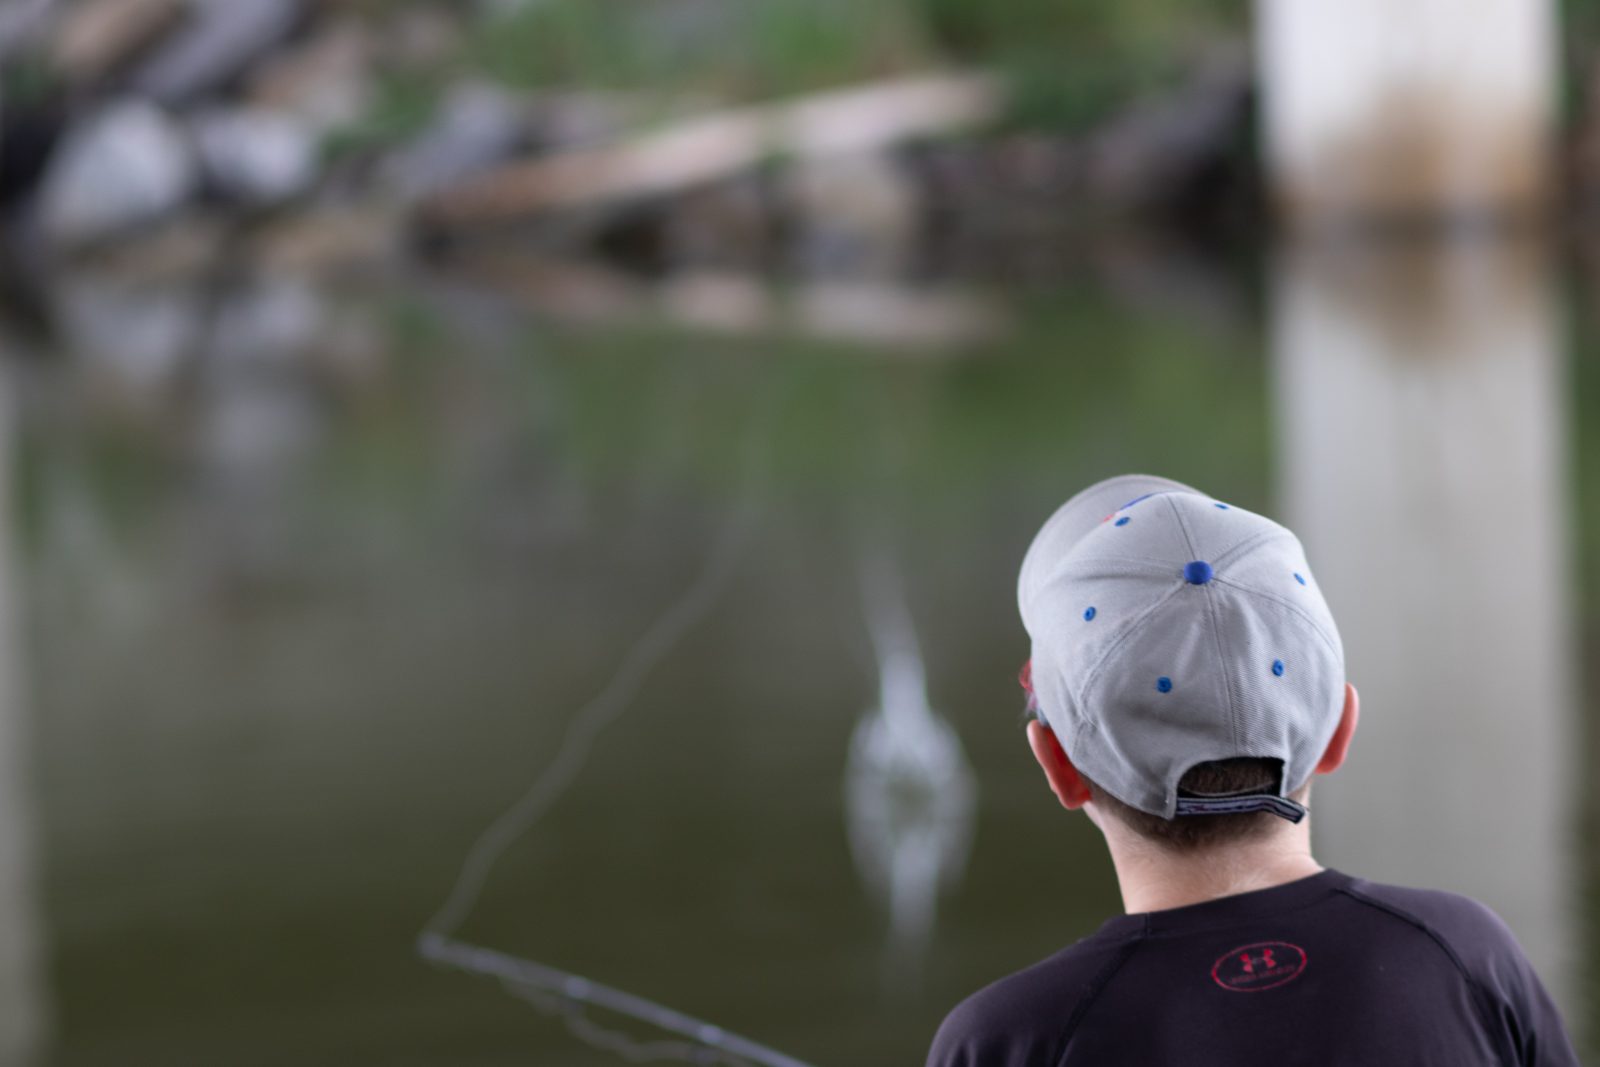 WEEKEND EVENT: Fishing for Special Needs